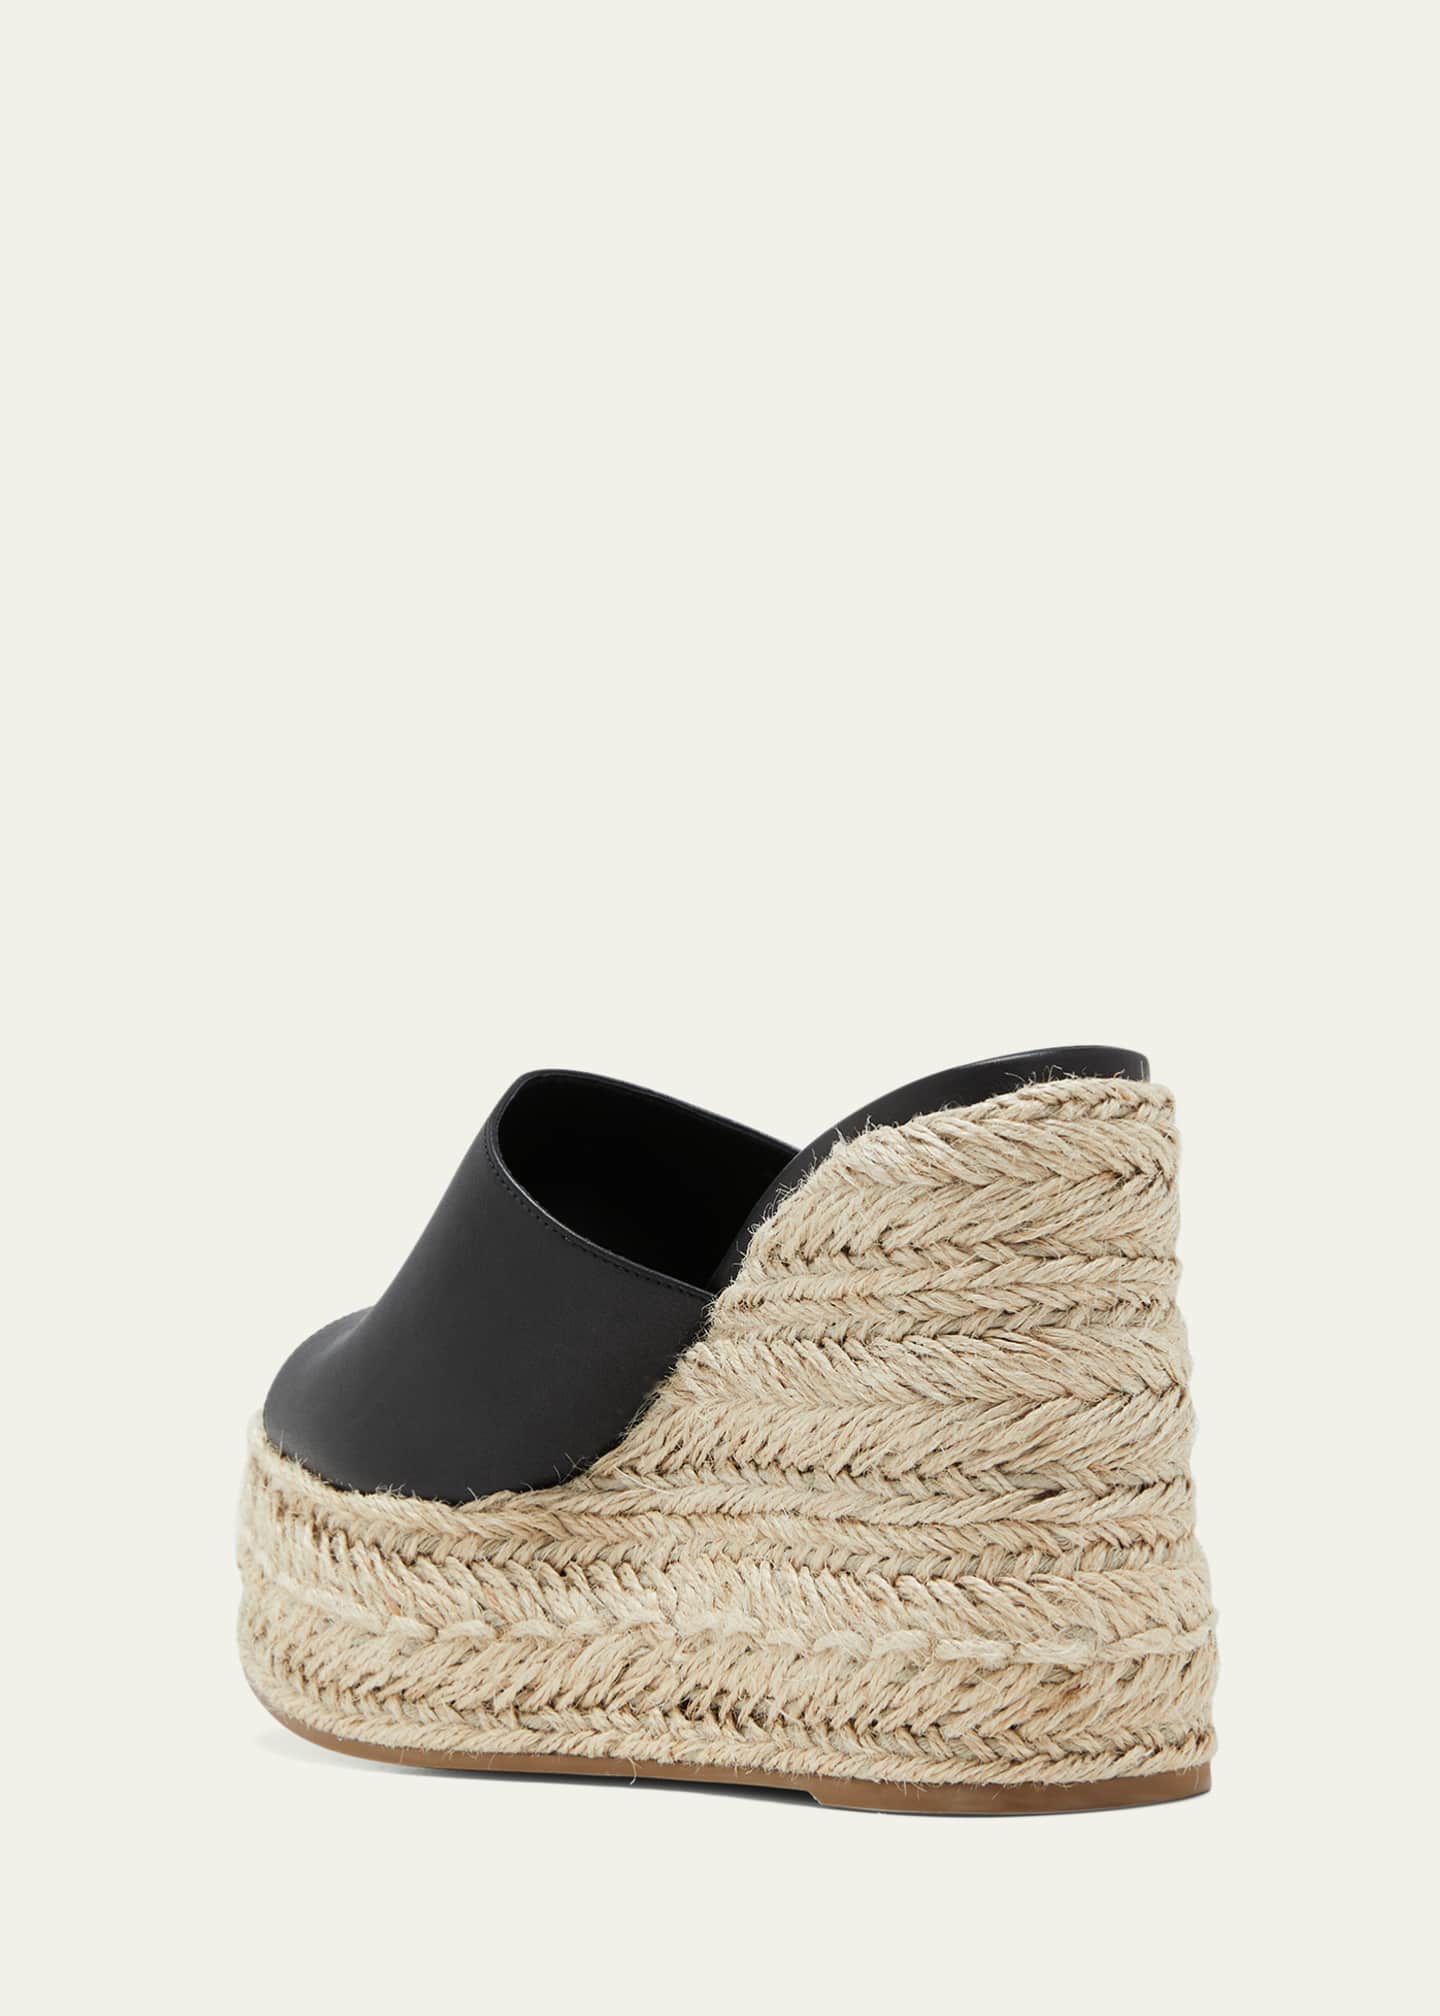 Christian Louboutin Multicolor Leather Espadrille Wedge Ankle